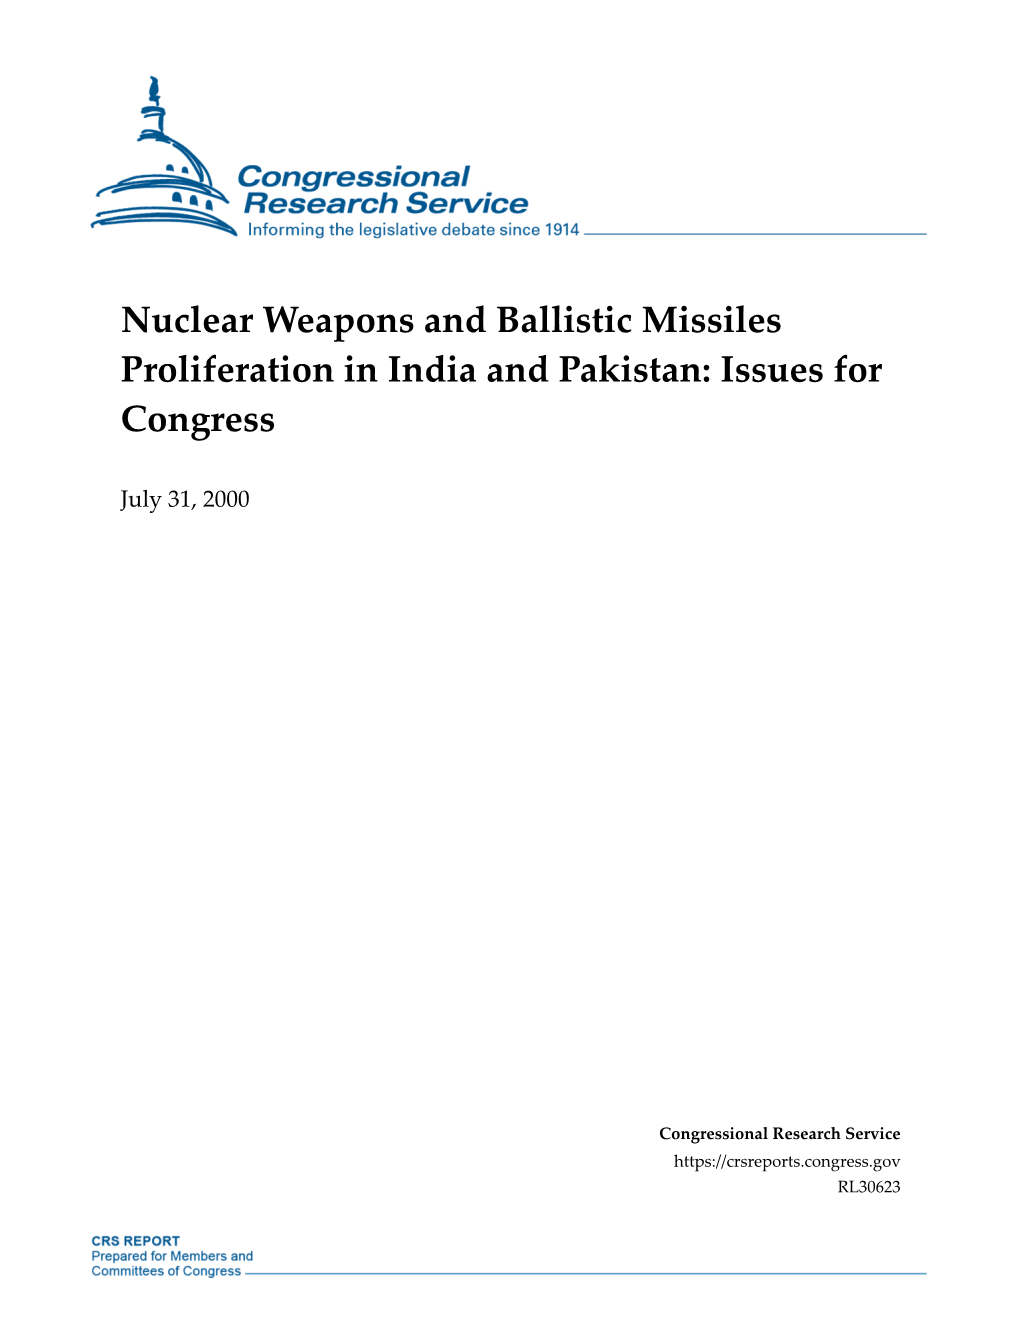 Nuclear Weapons and Ballistic Missiles Proliferation in India and Pakistan: Issues for Congress